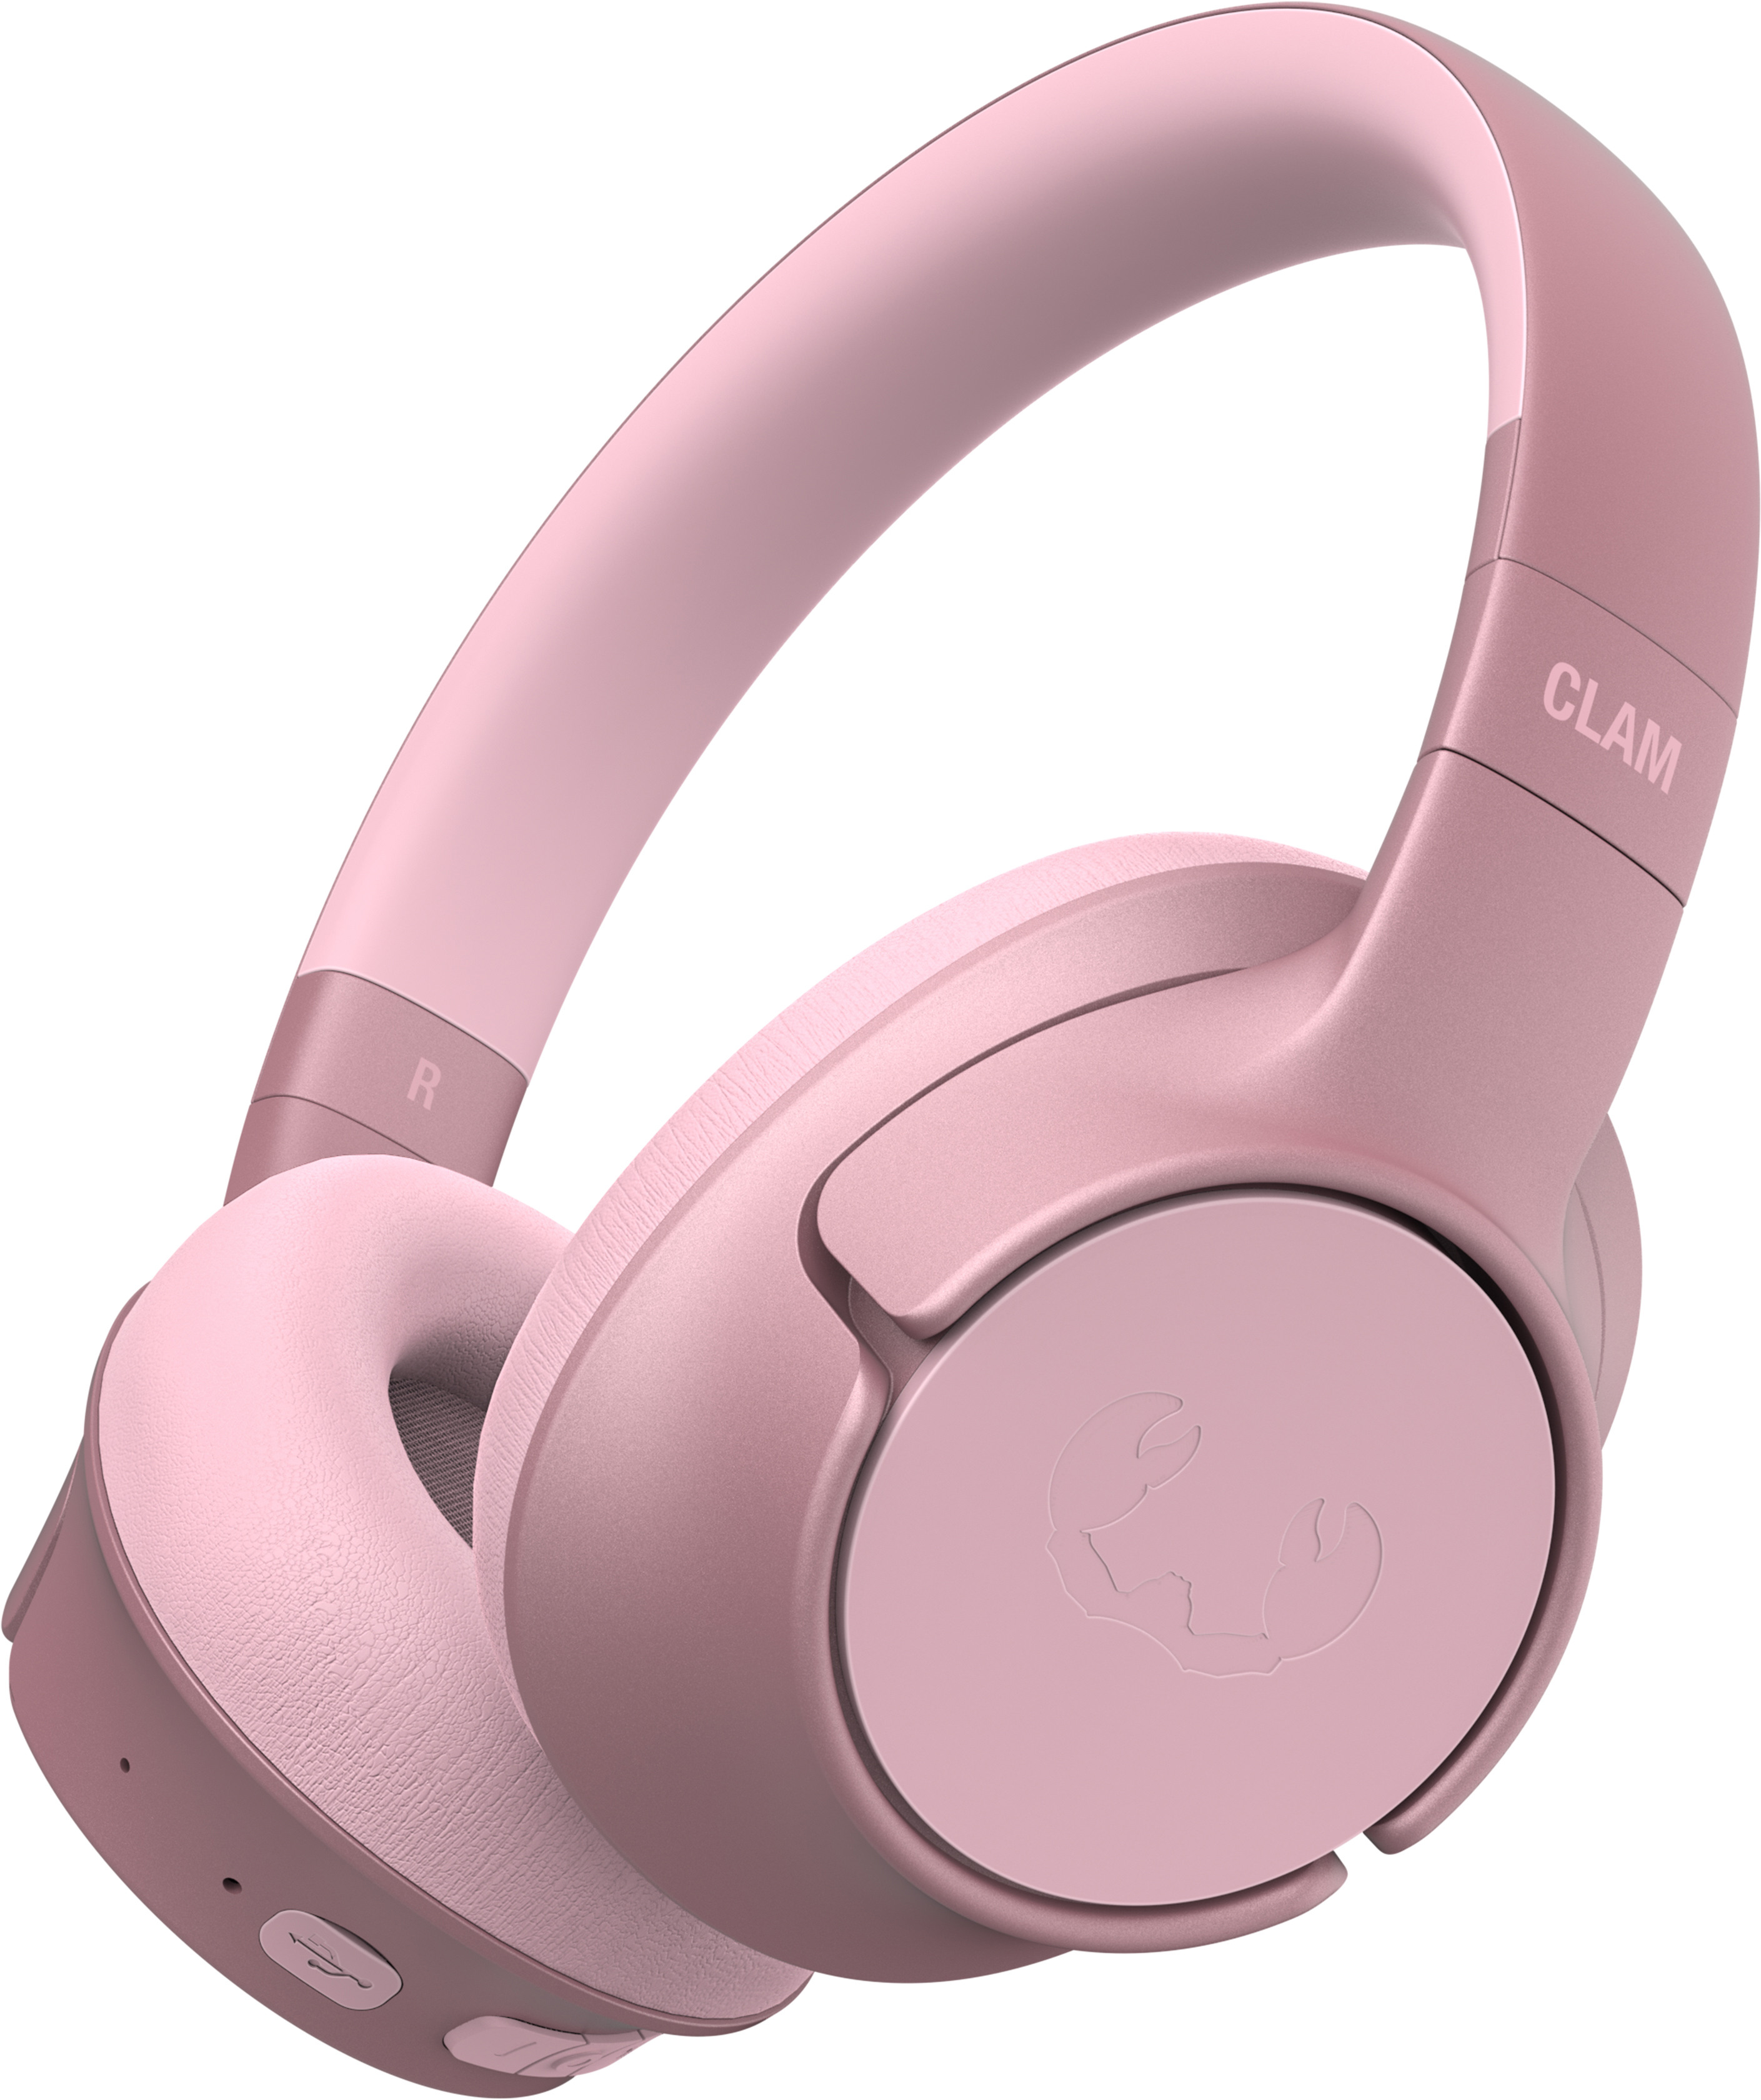 FRESH'N R Clam Fuse - Wless over-ear 3HP3300PP Pastel Pink with Hybrid ANC